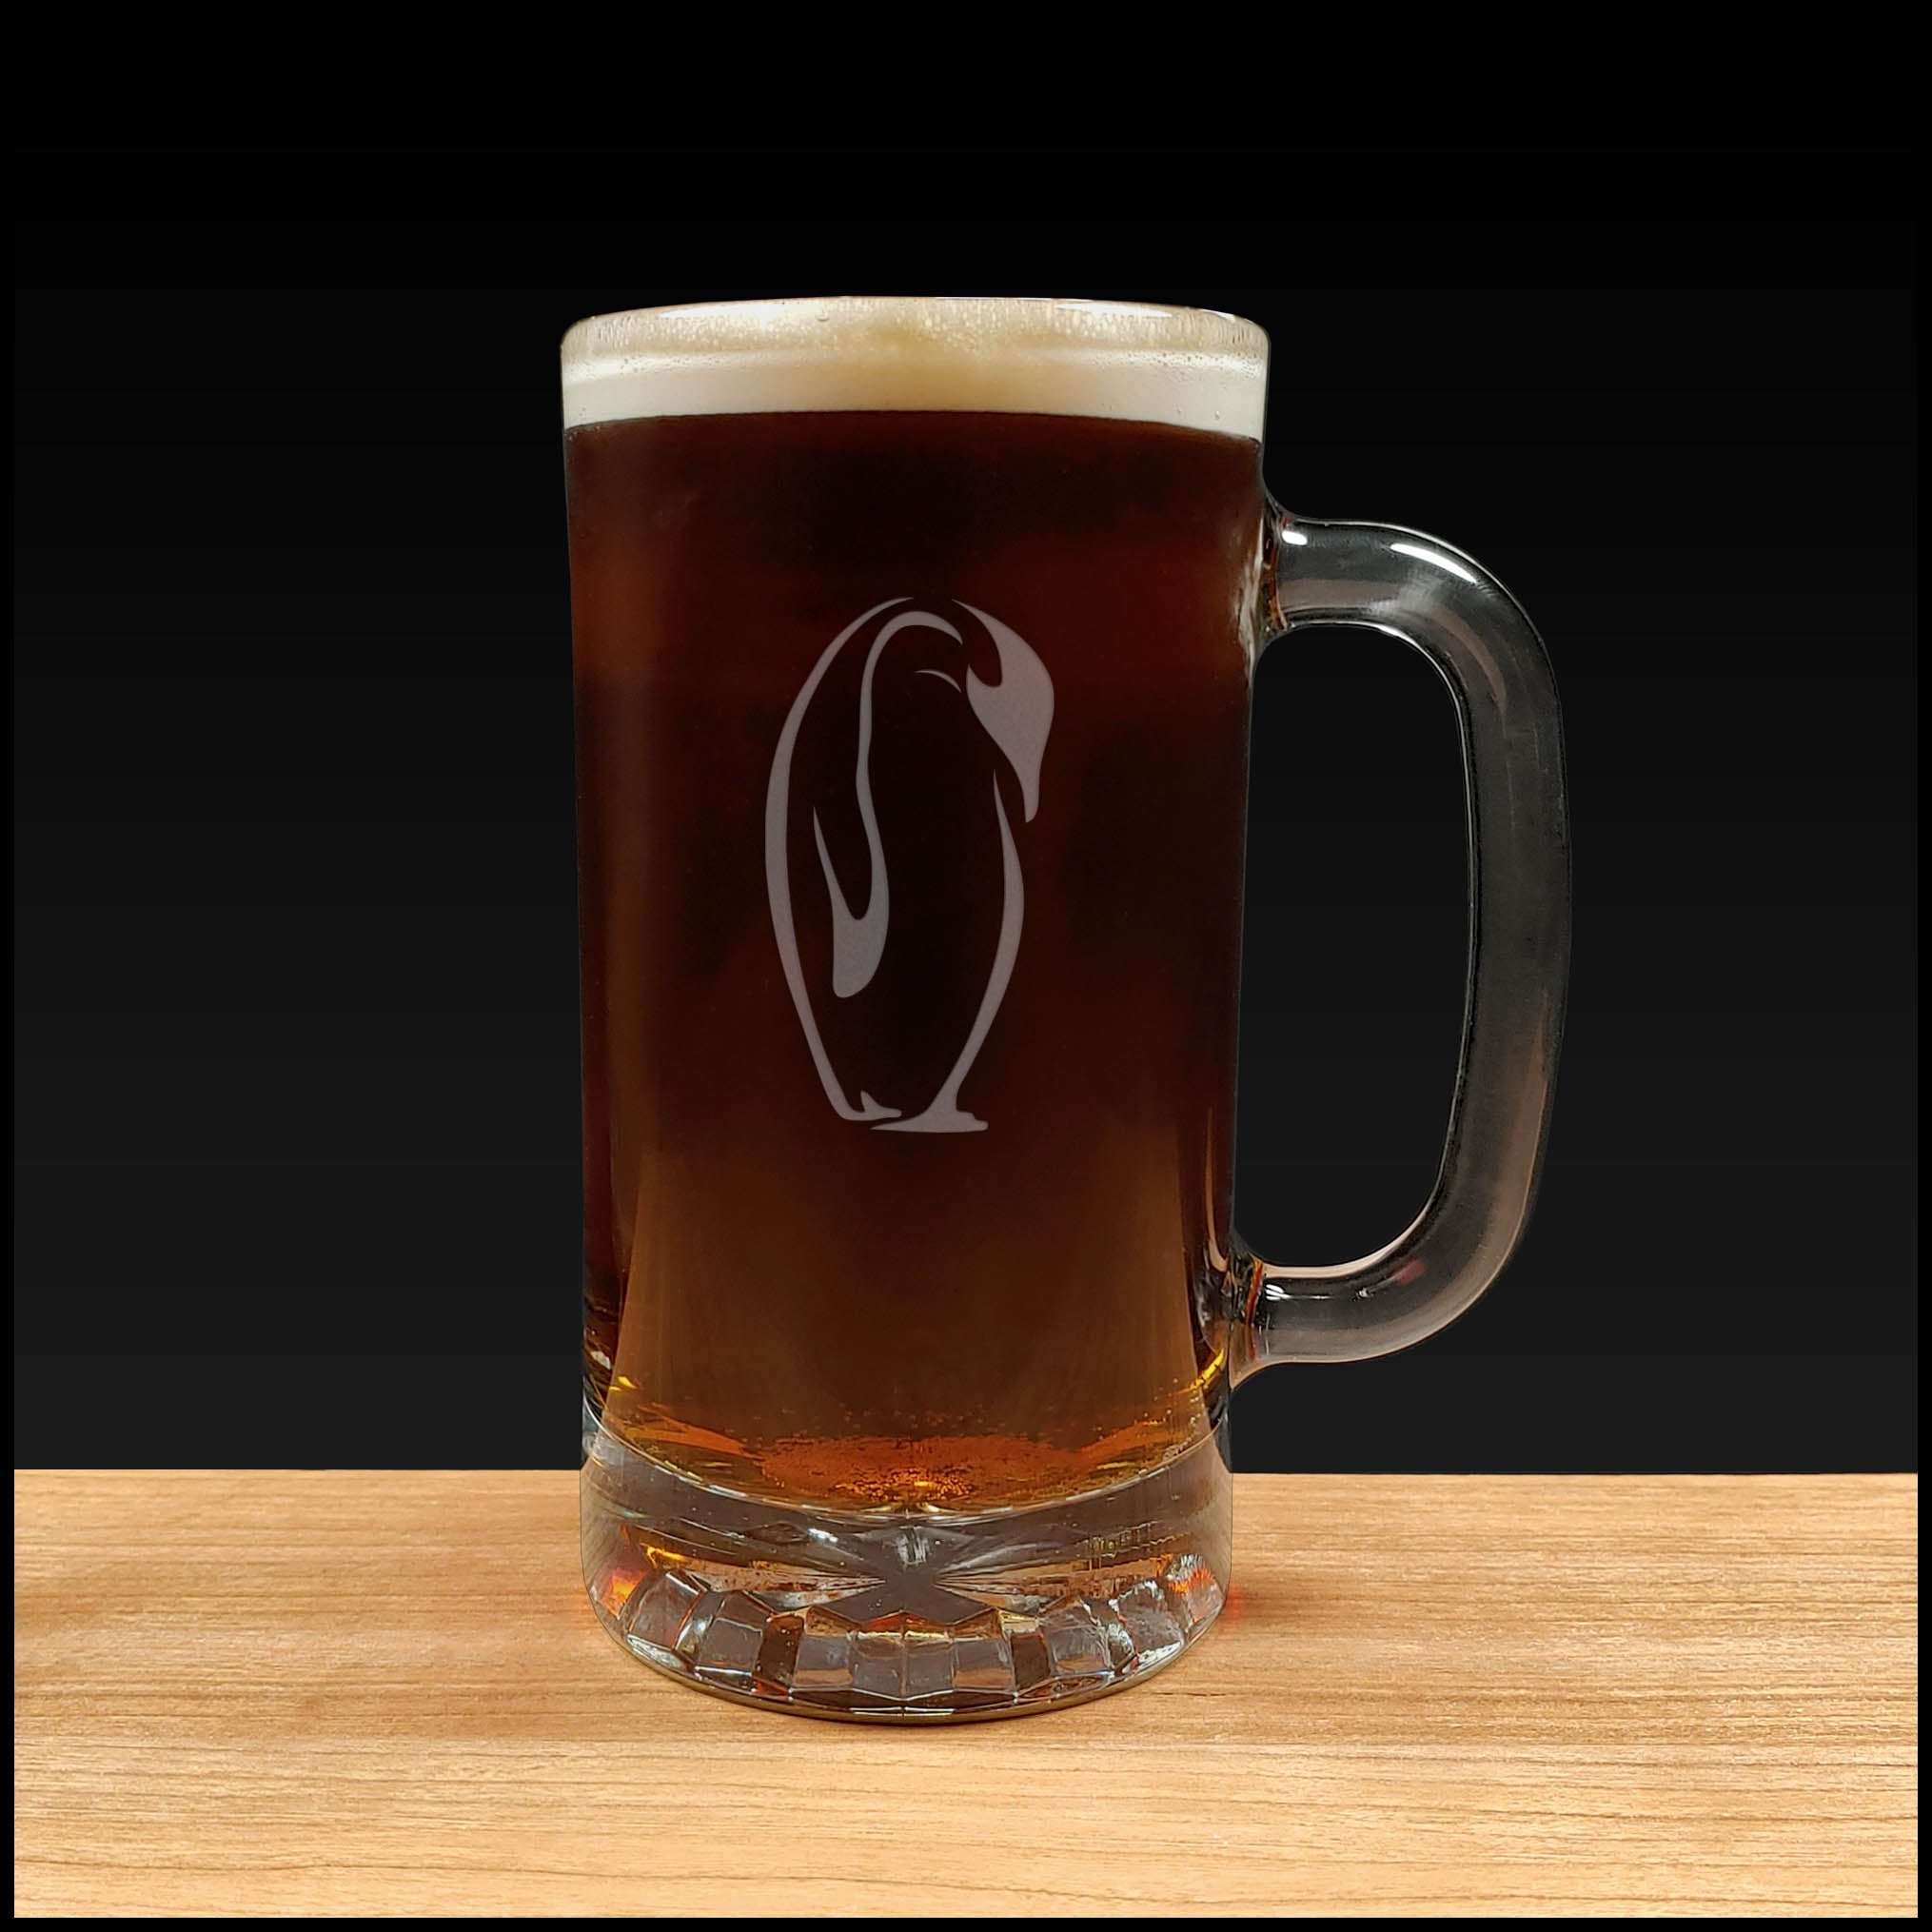 penguin design on a 16oz handled Beer Mug containing a Dark Beer - Copyright Hues in Glass